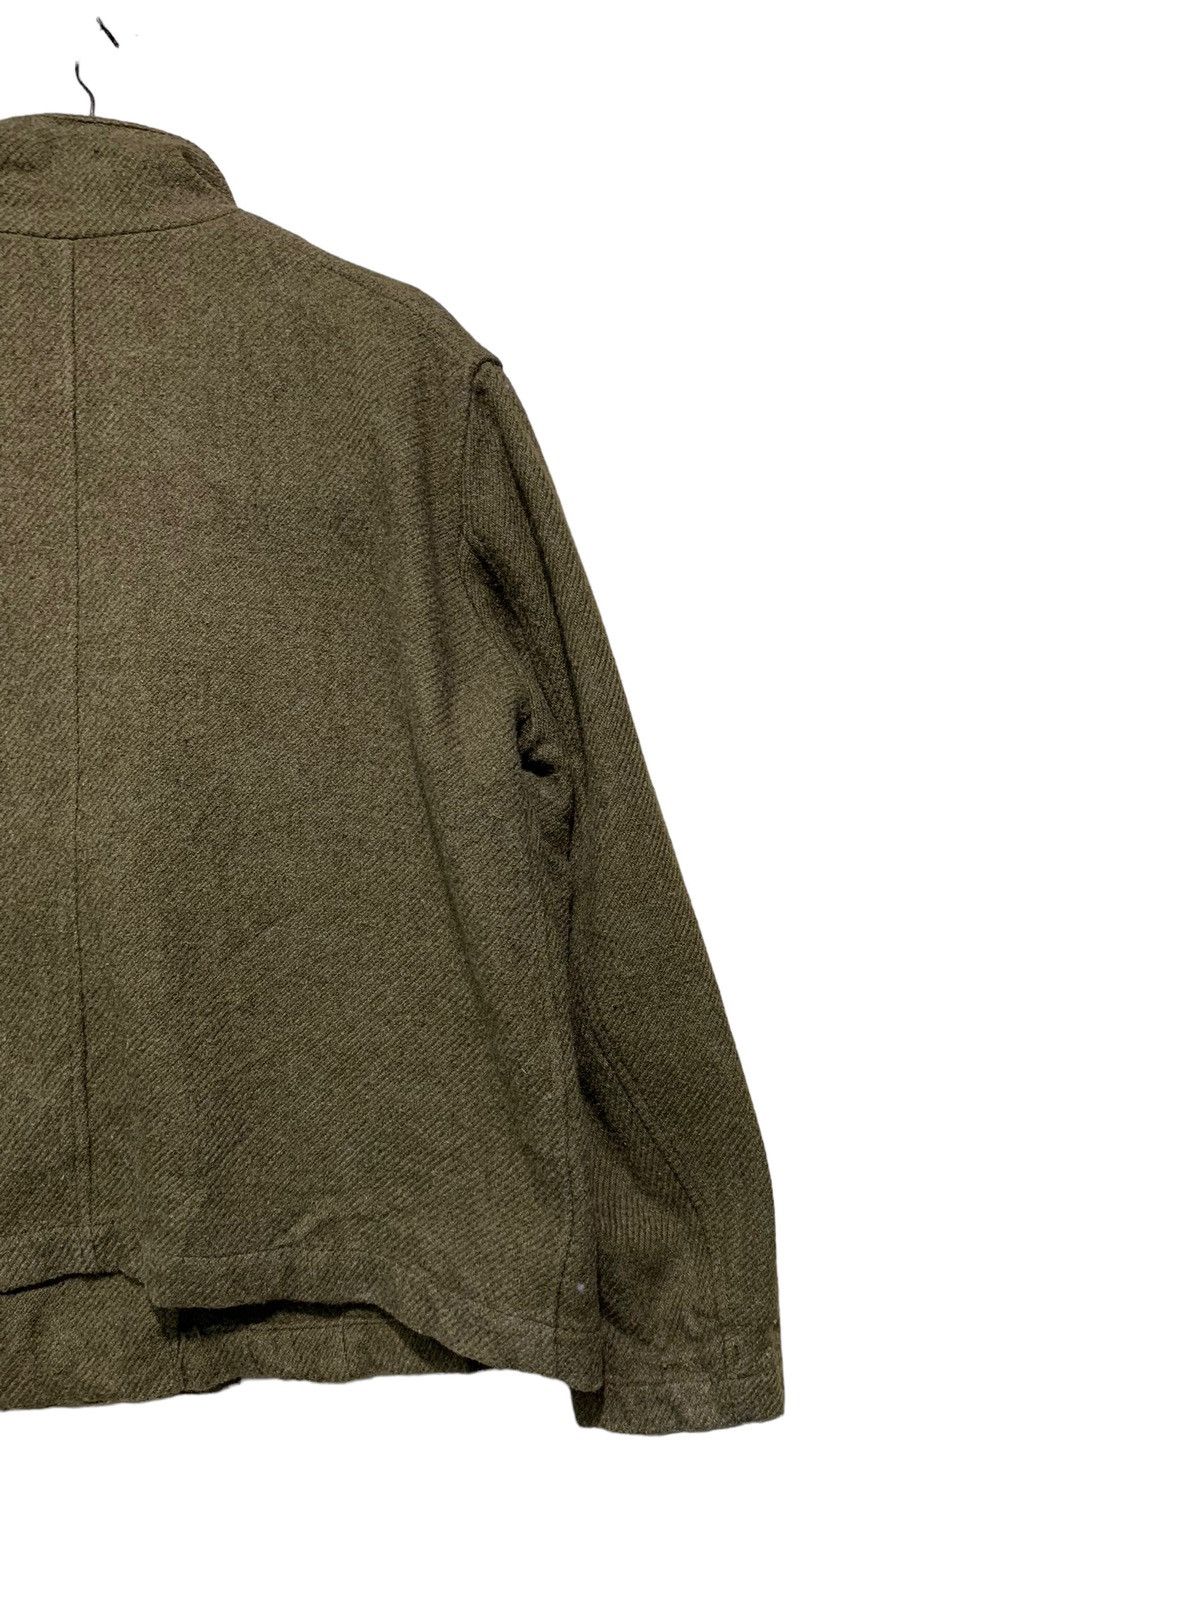 🔥Y’s WOOL DOUBLE BREAT JACKETS OLIVE GREEN - 8